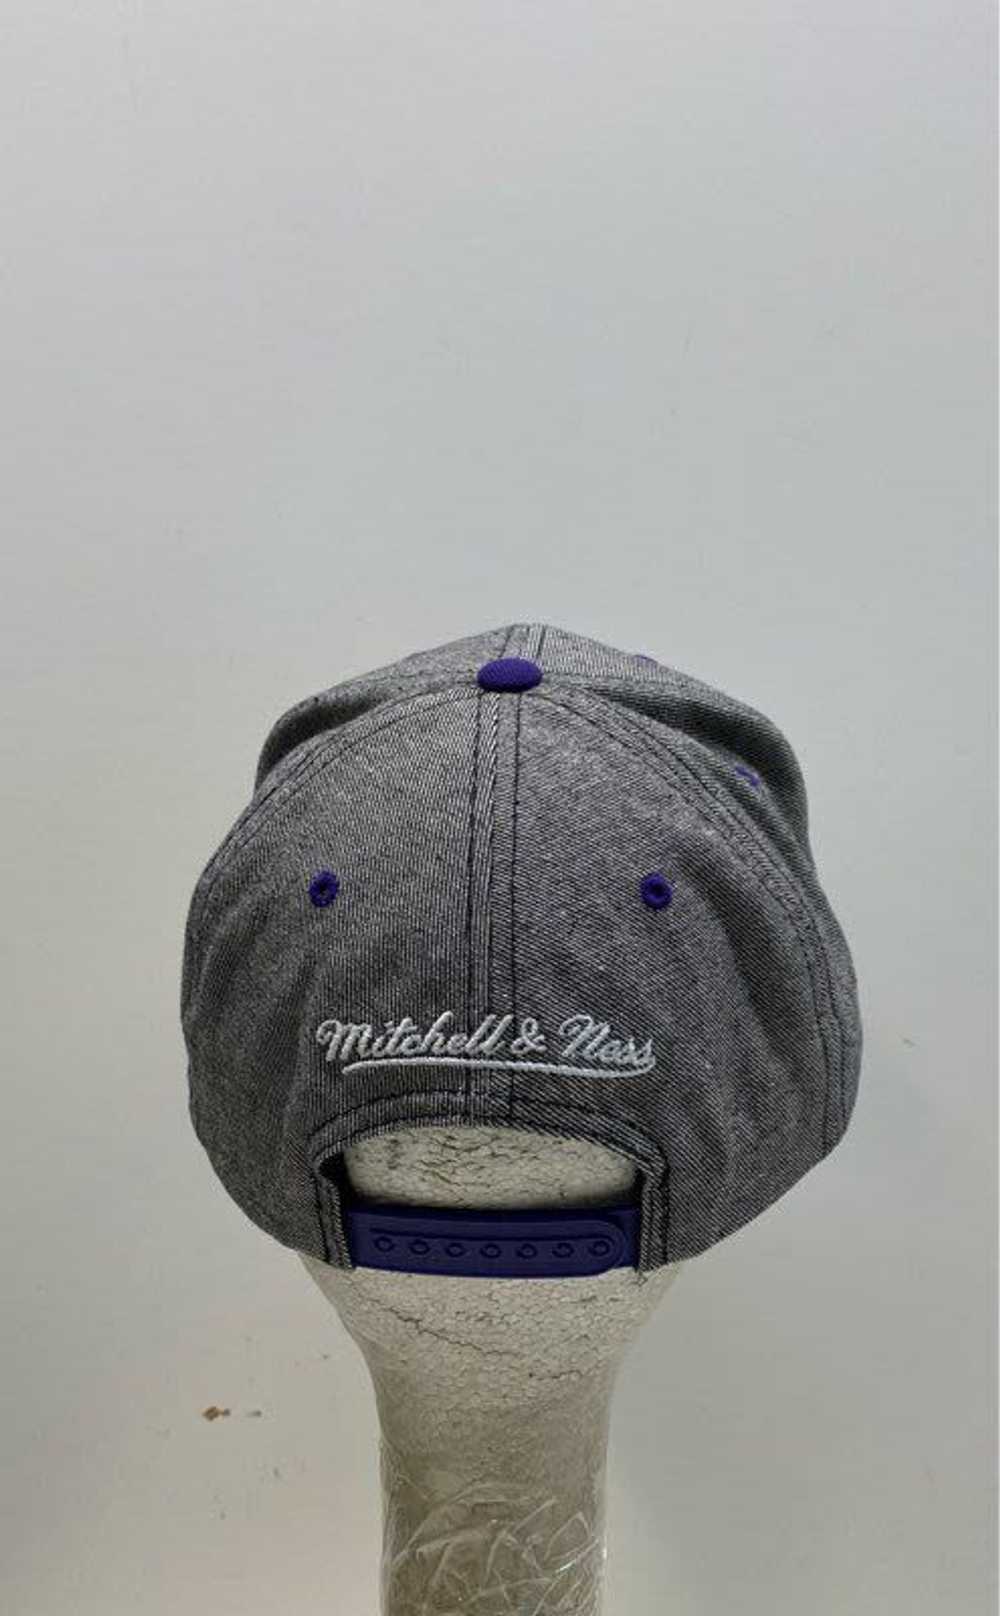 Mitchell & Ness Los Angeles Lakers Snapback Cap - image 2